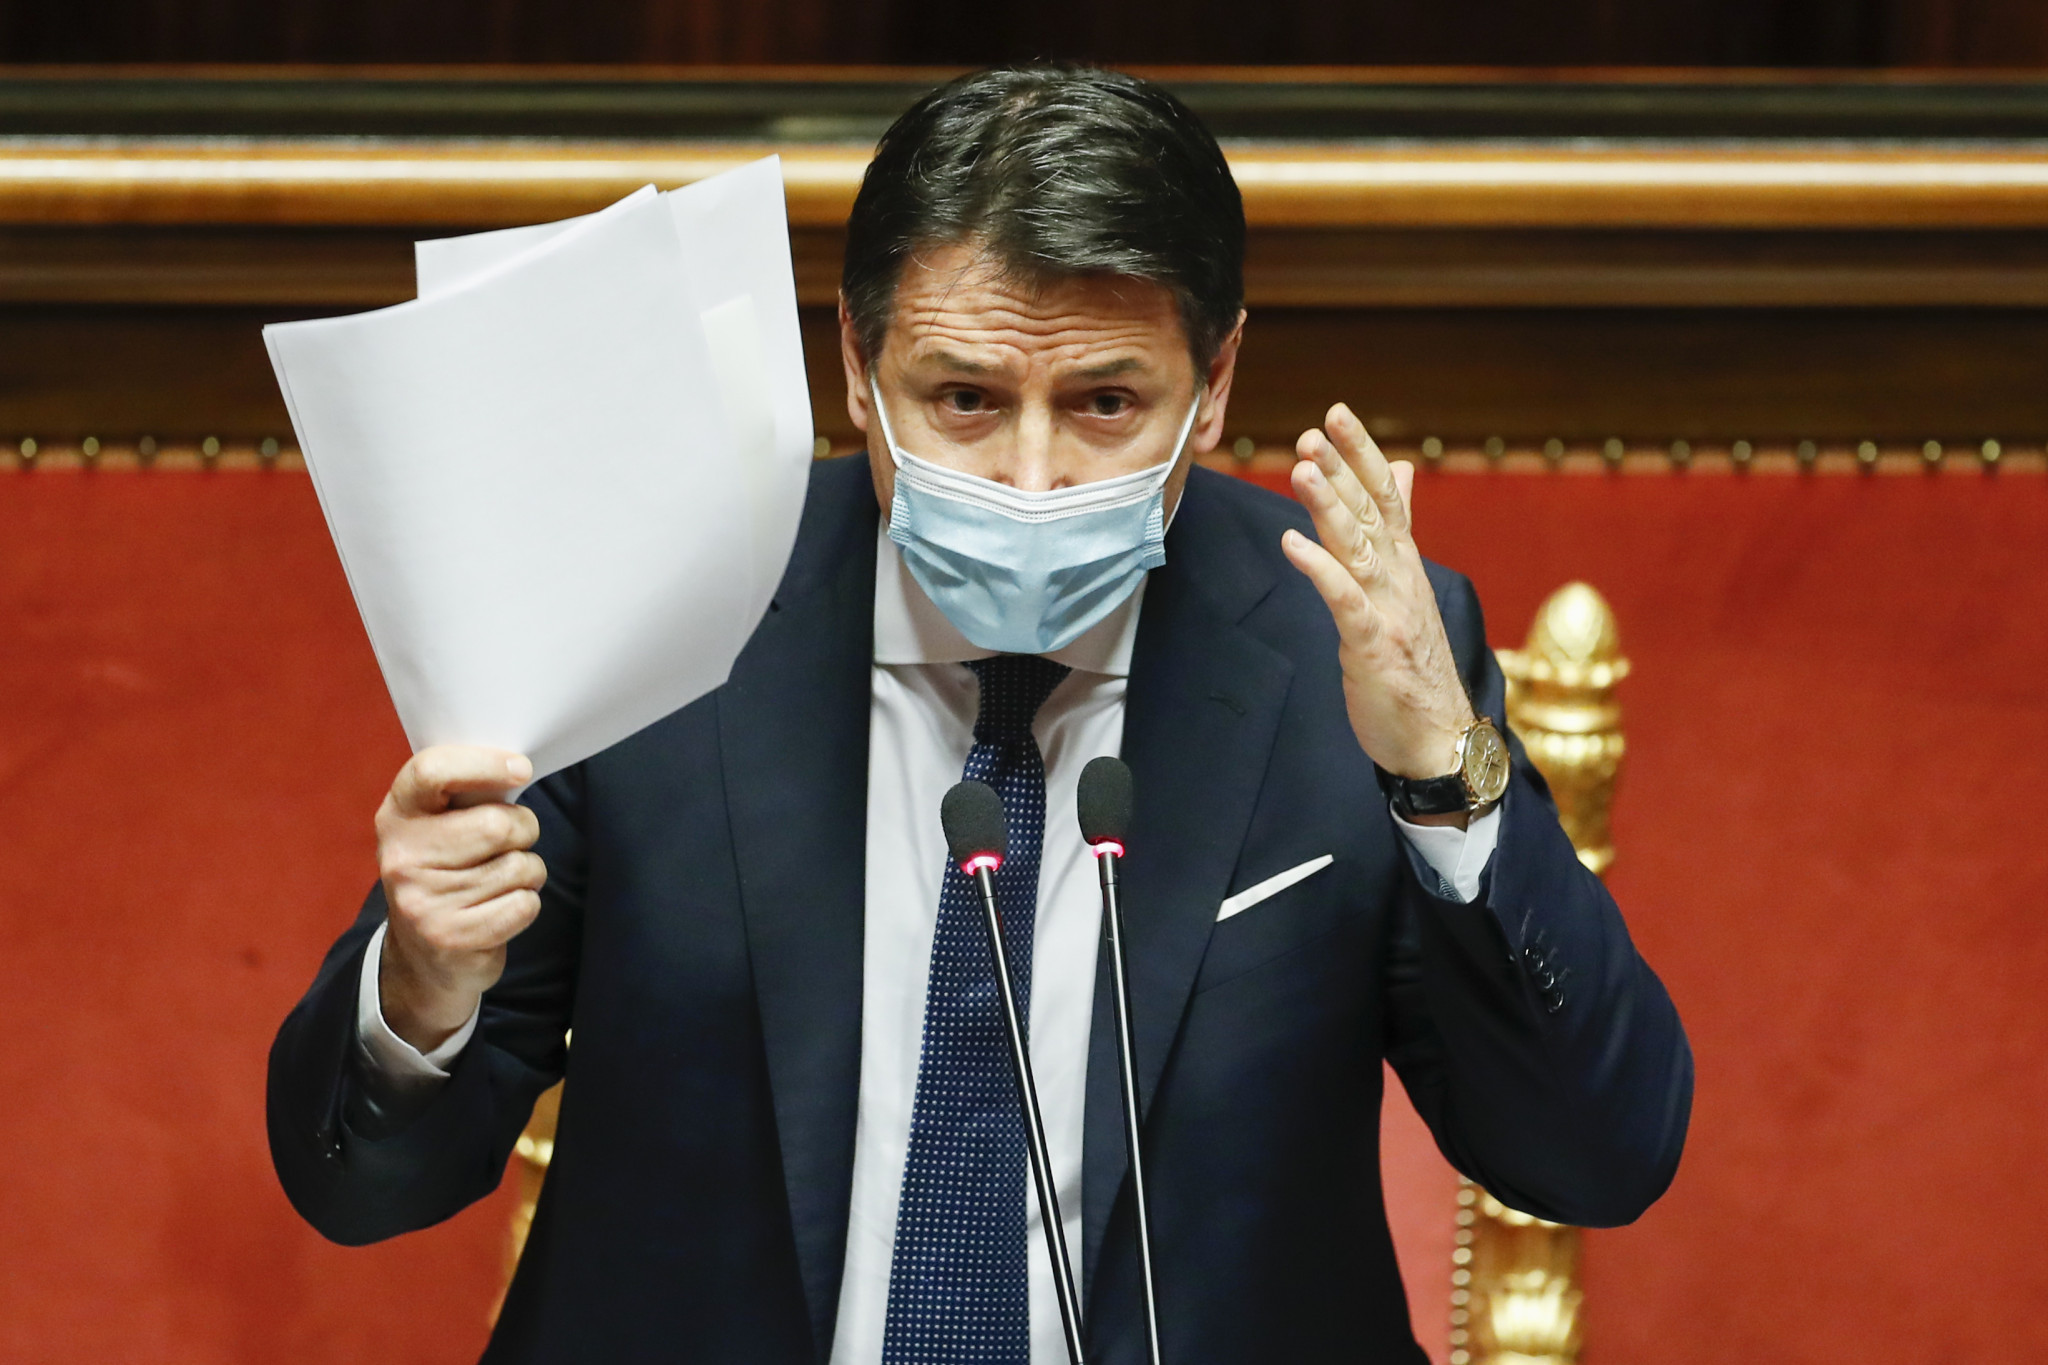 Giuseppe Conte has resigned as the Italian Prime Minister due to his handling of COVID-19 ©Getty Images